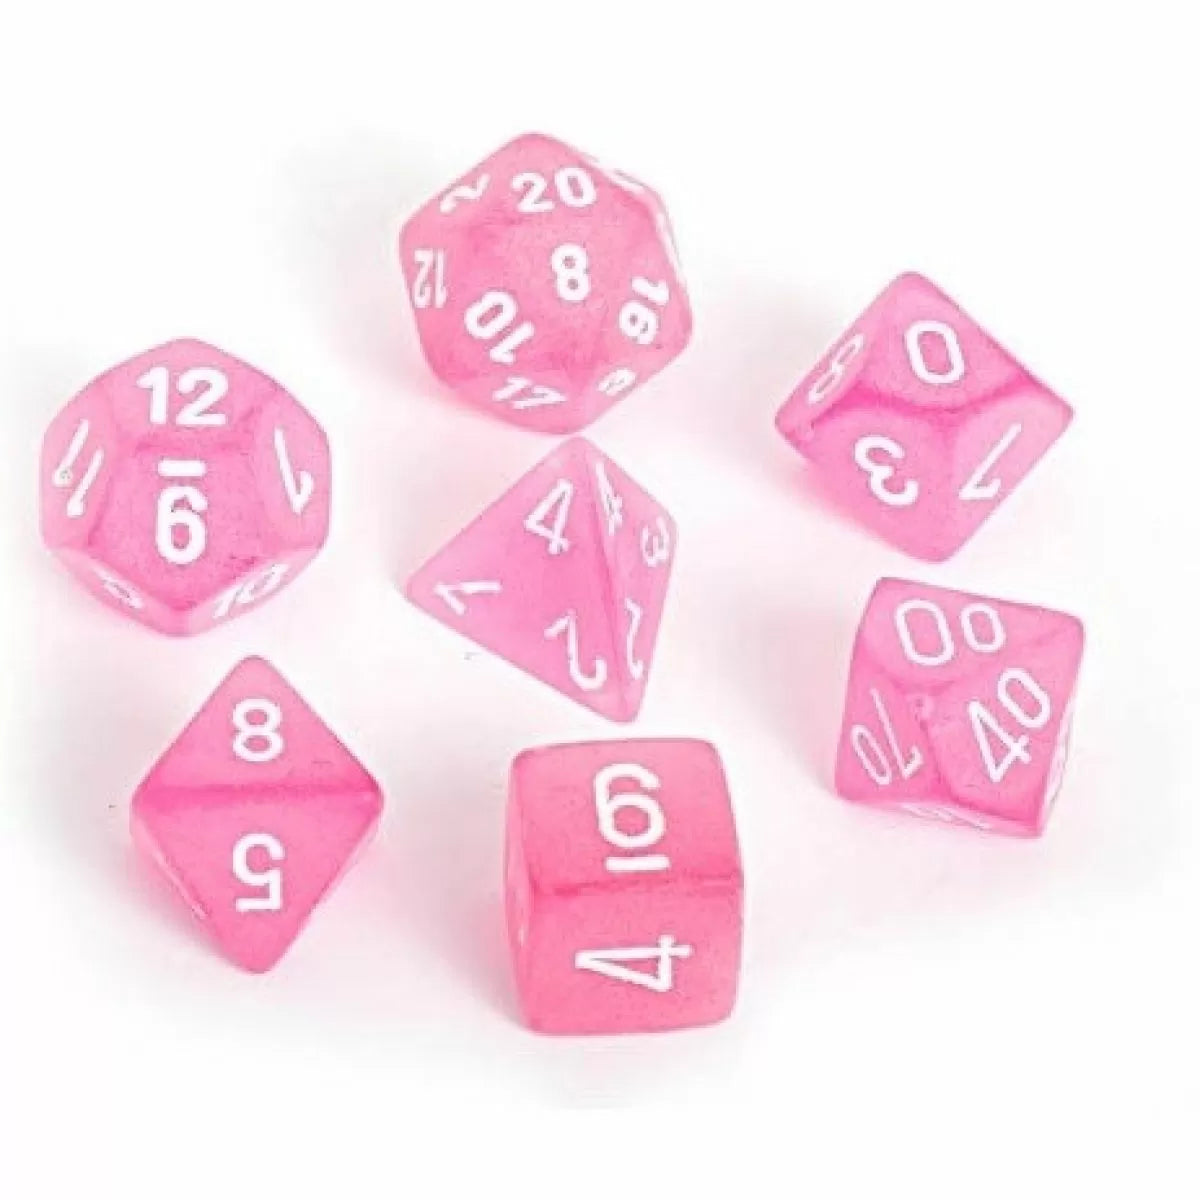 CHX 27464 FROSTED PINK/WHITE 7-DIE SET